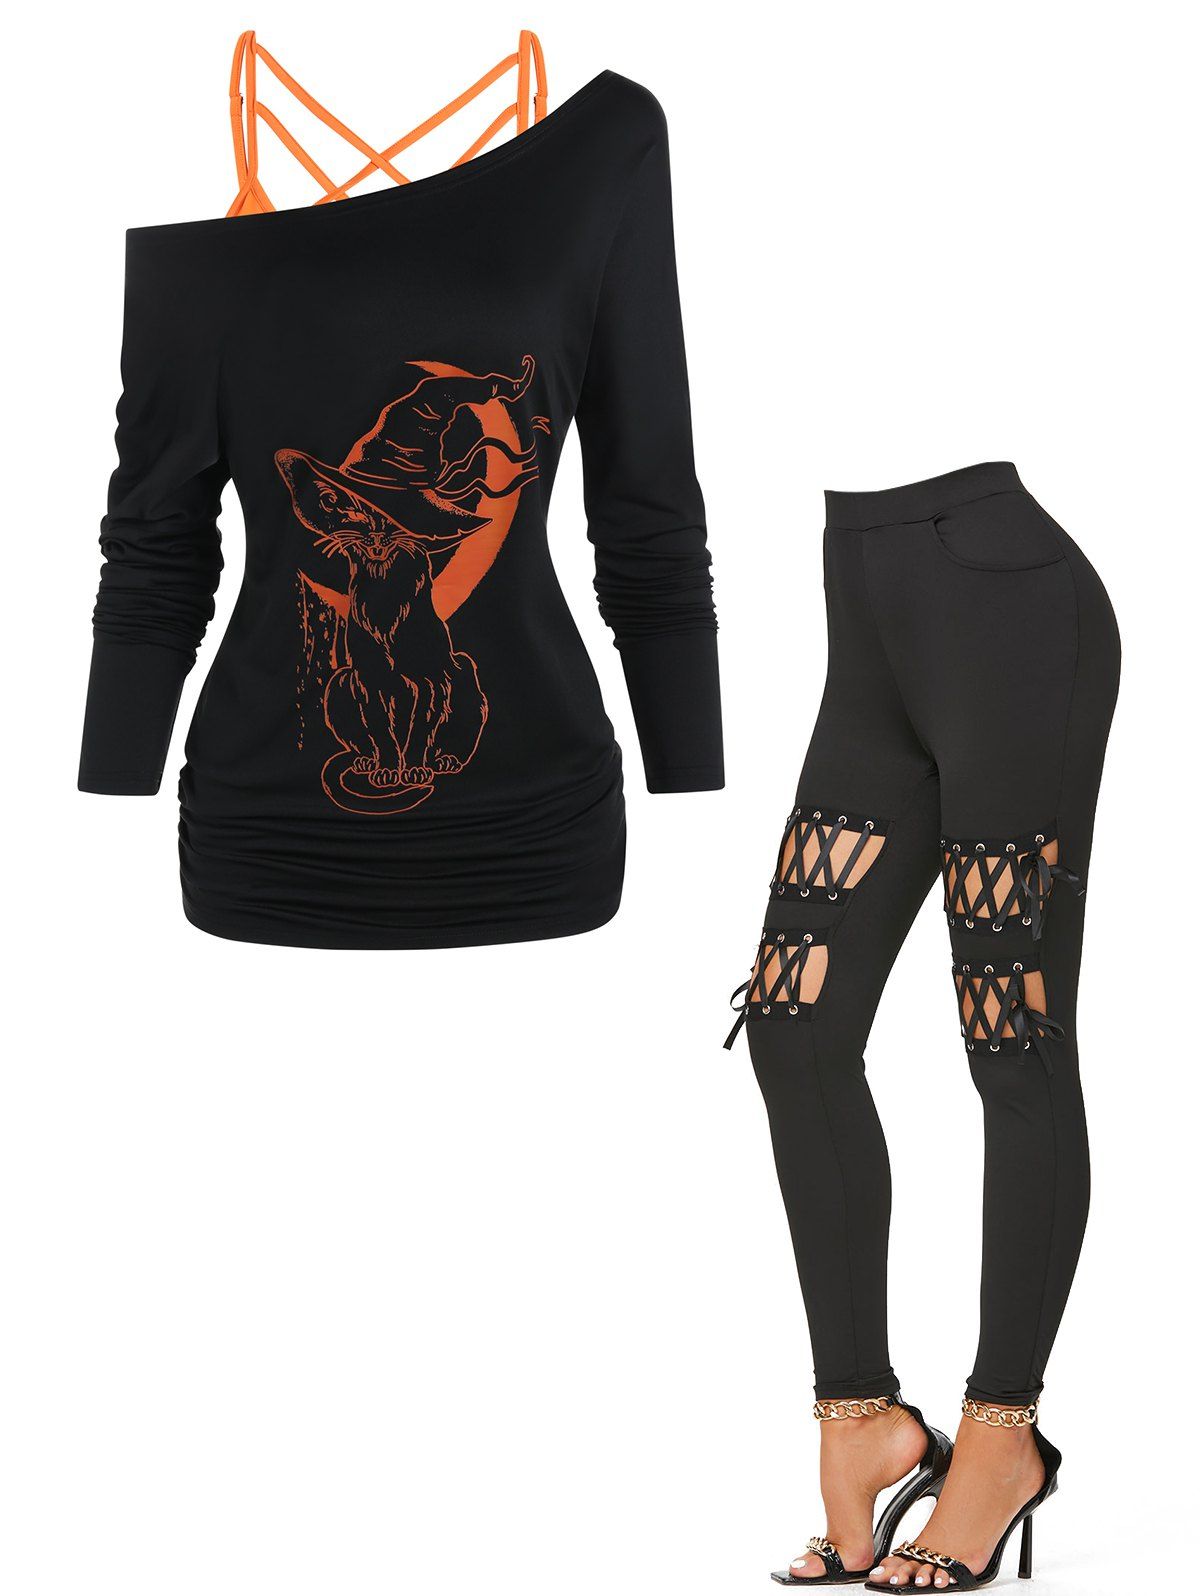 Crisscross Cami Top Moon Cat Witch Print Long Sleeve T-shirt Halloween Top And Lace Up High Rise Leggings Outfit - BLACK S